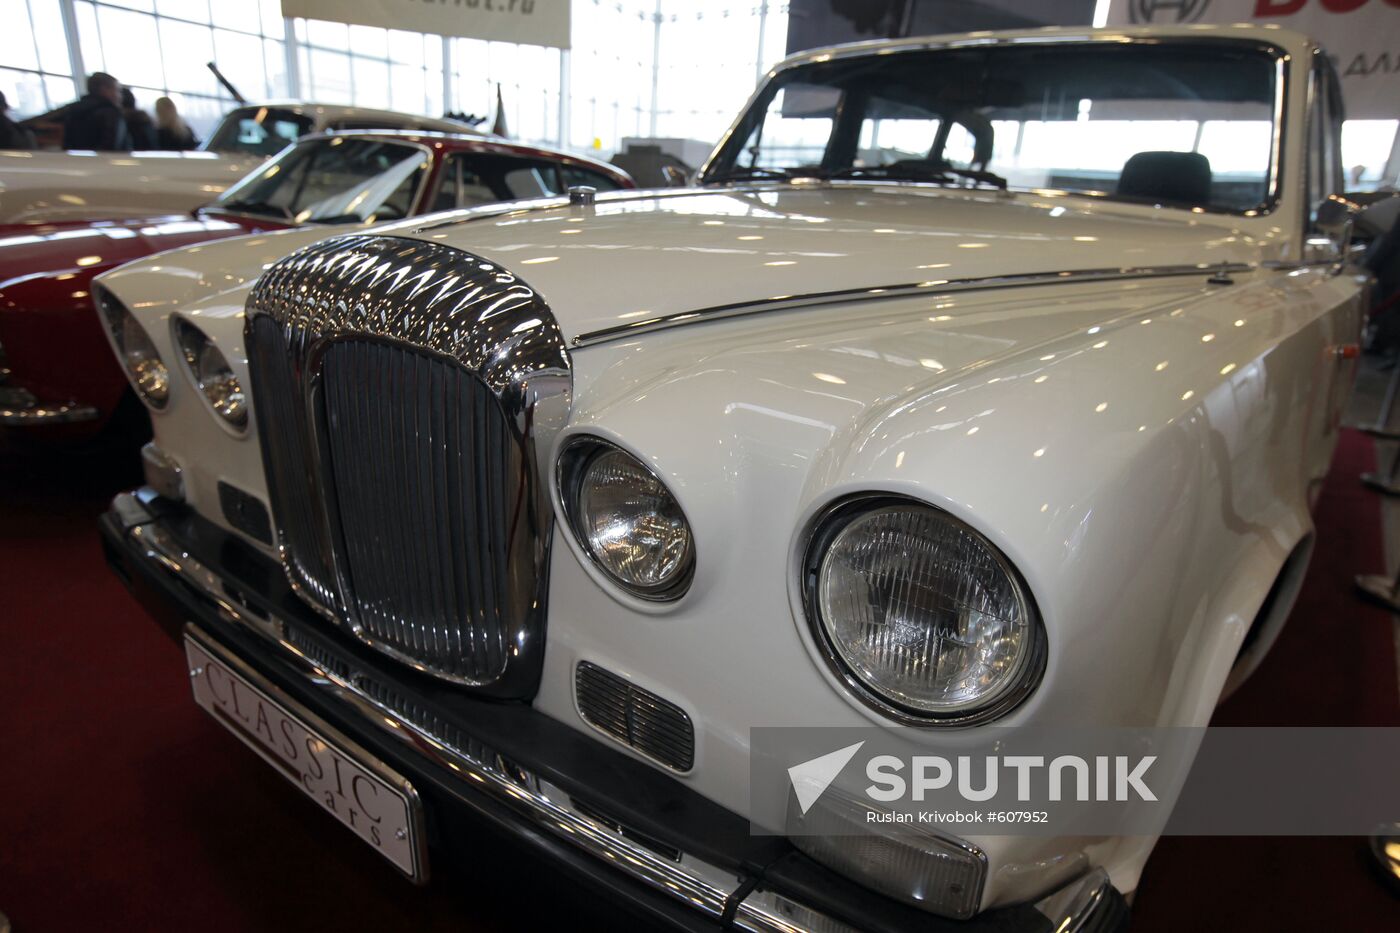 Oldtimer Gallery opens at Crocus Expo